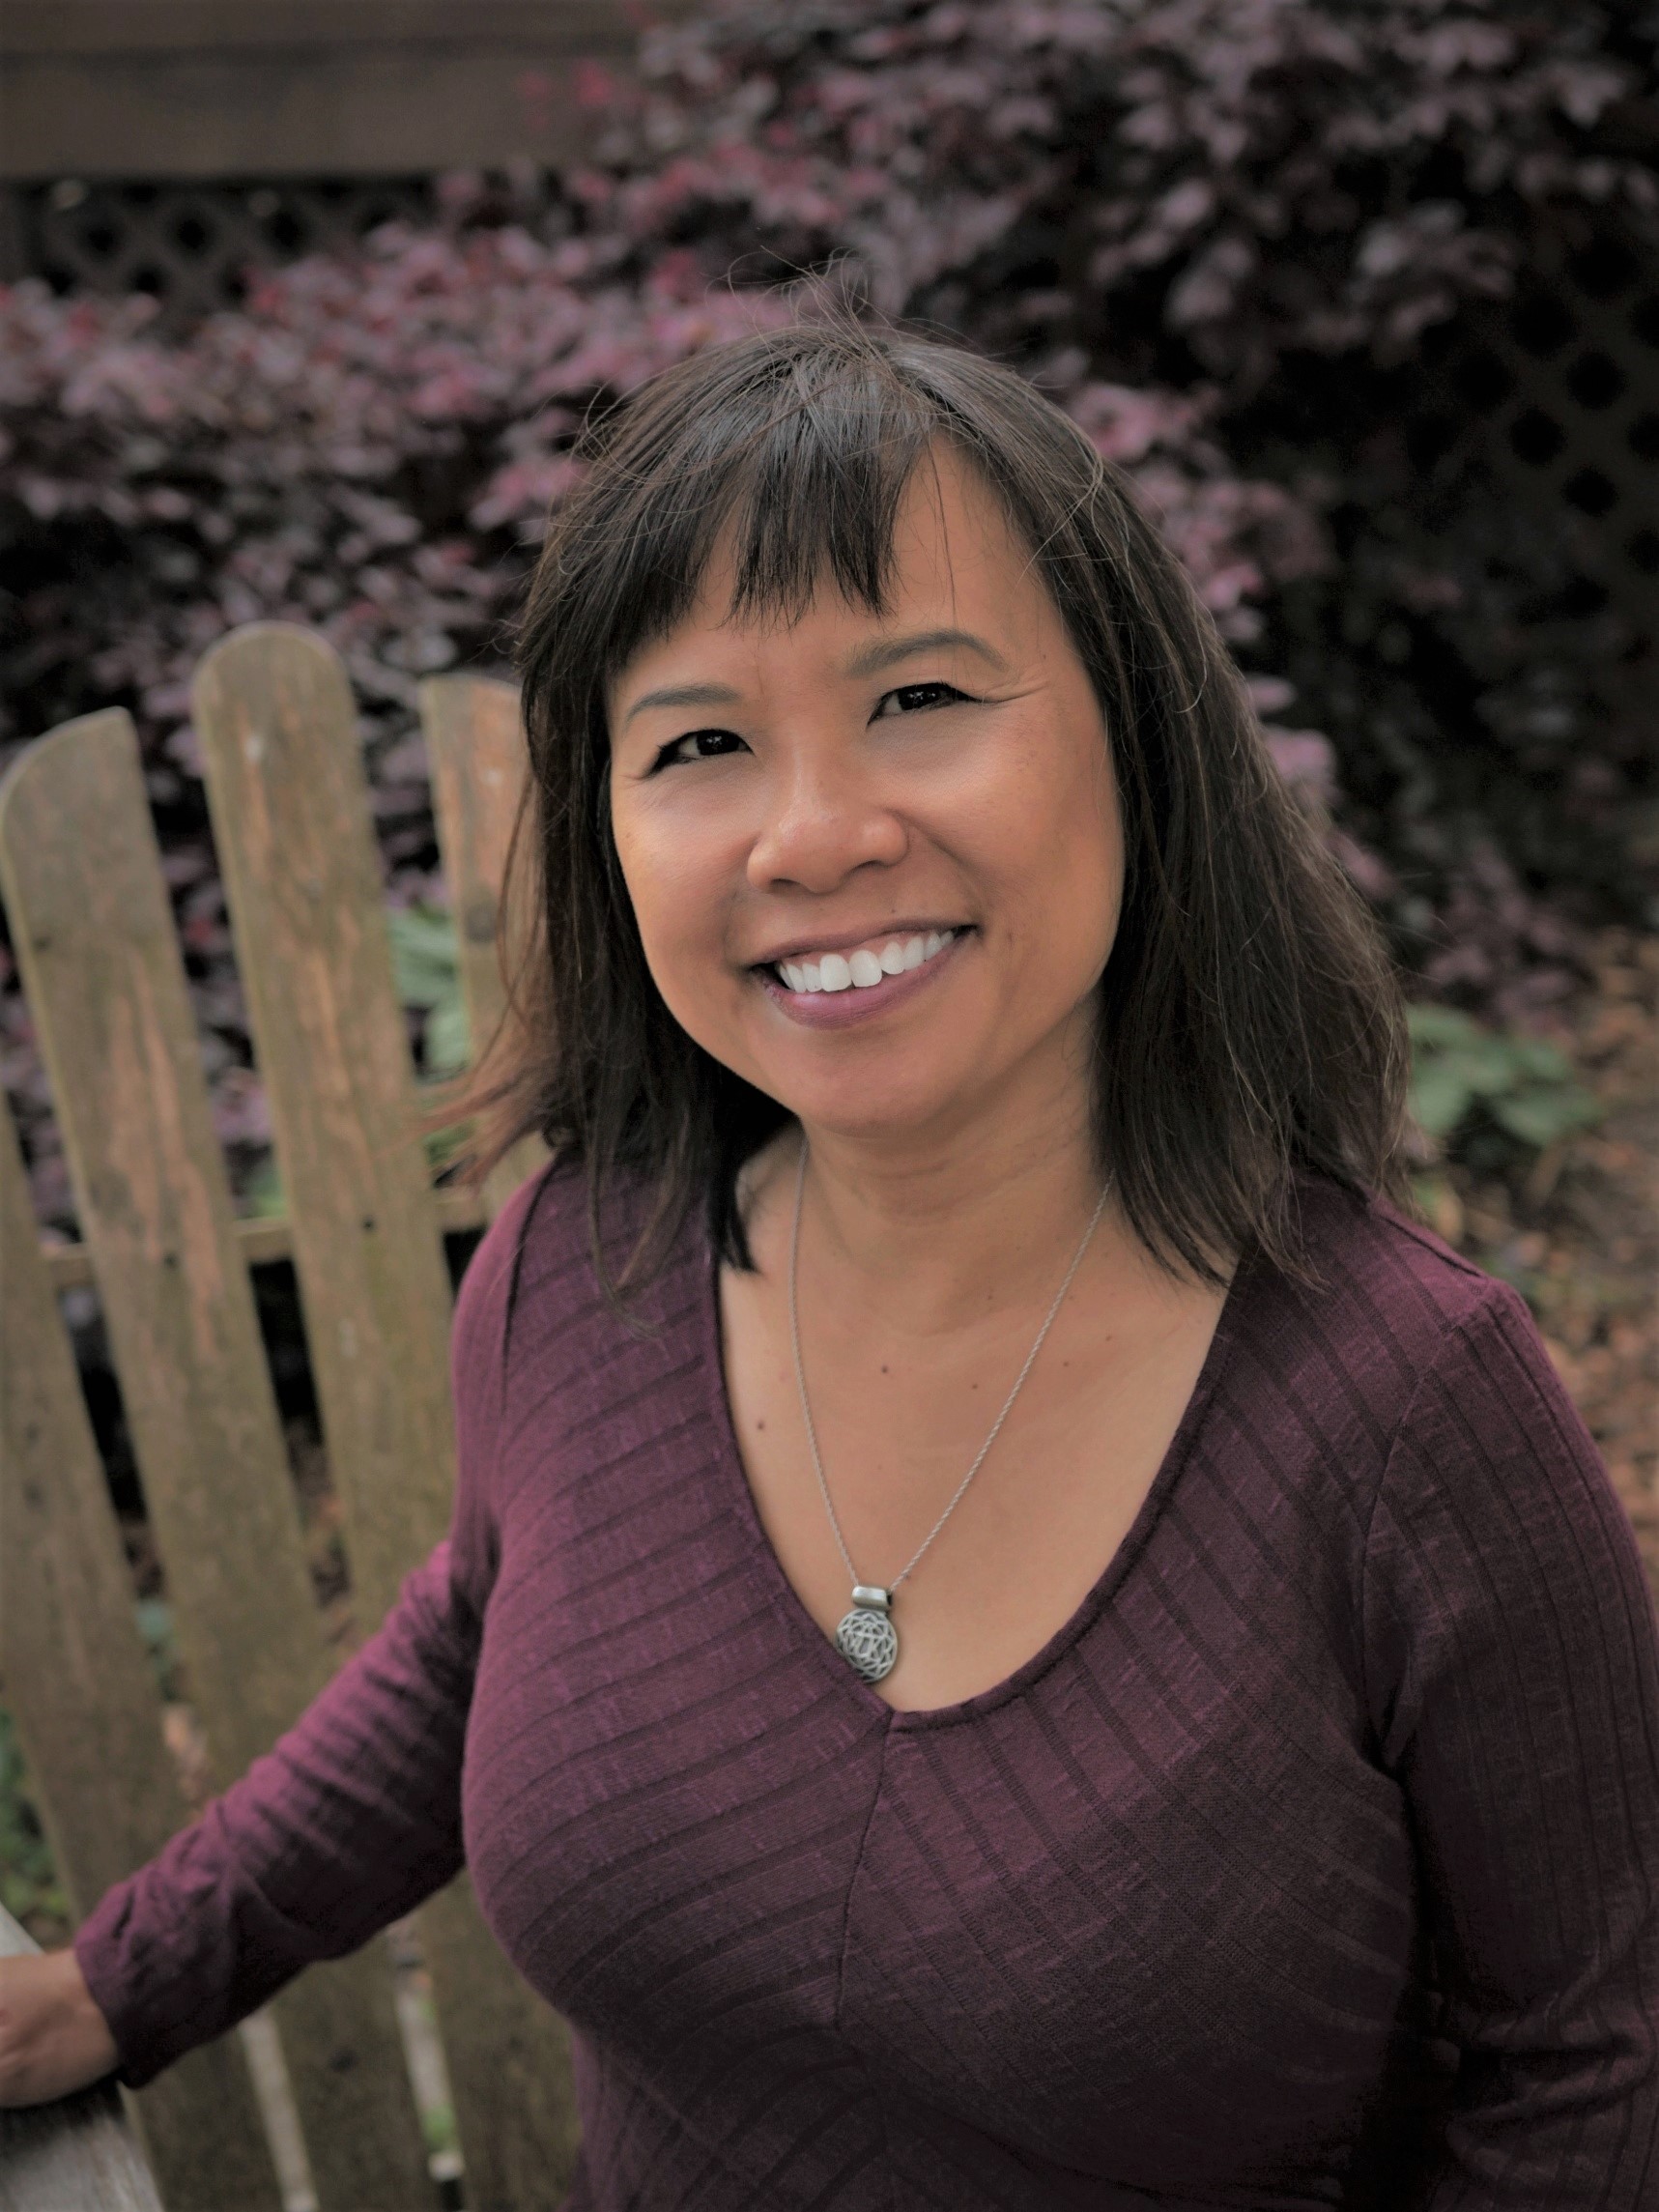 lynn cheng, chinese medicine herbalist and acupuncturist, sitting on a chair outdoors